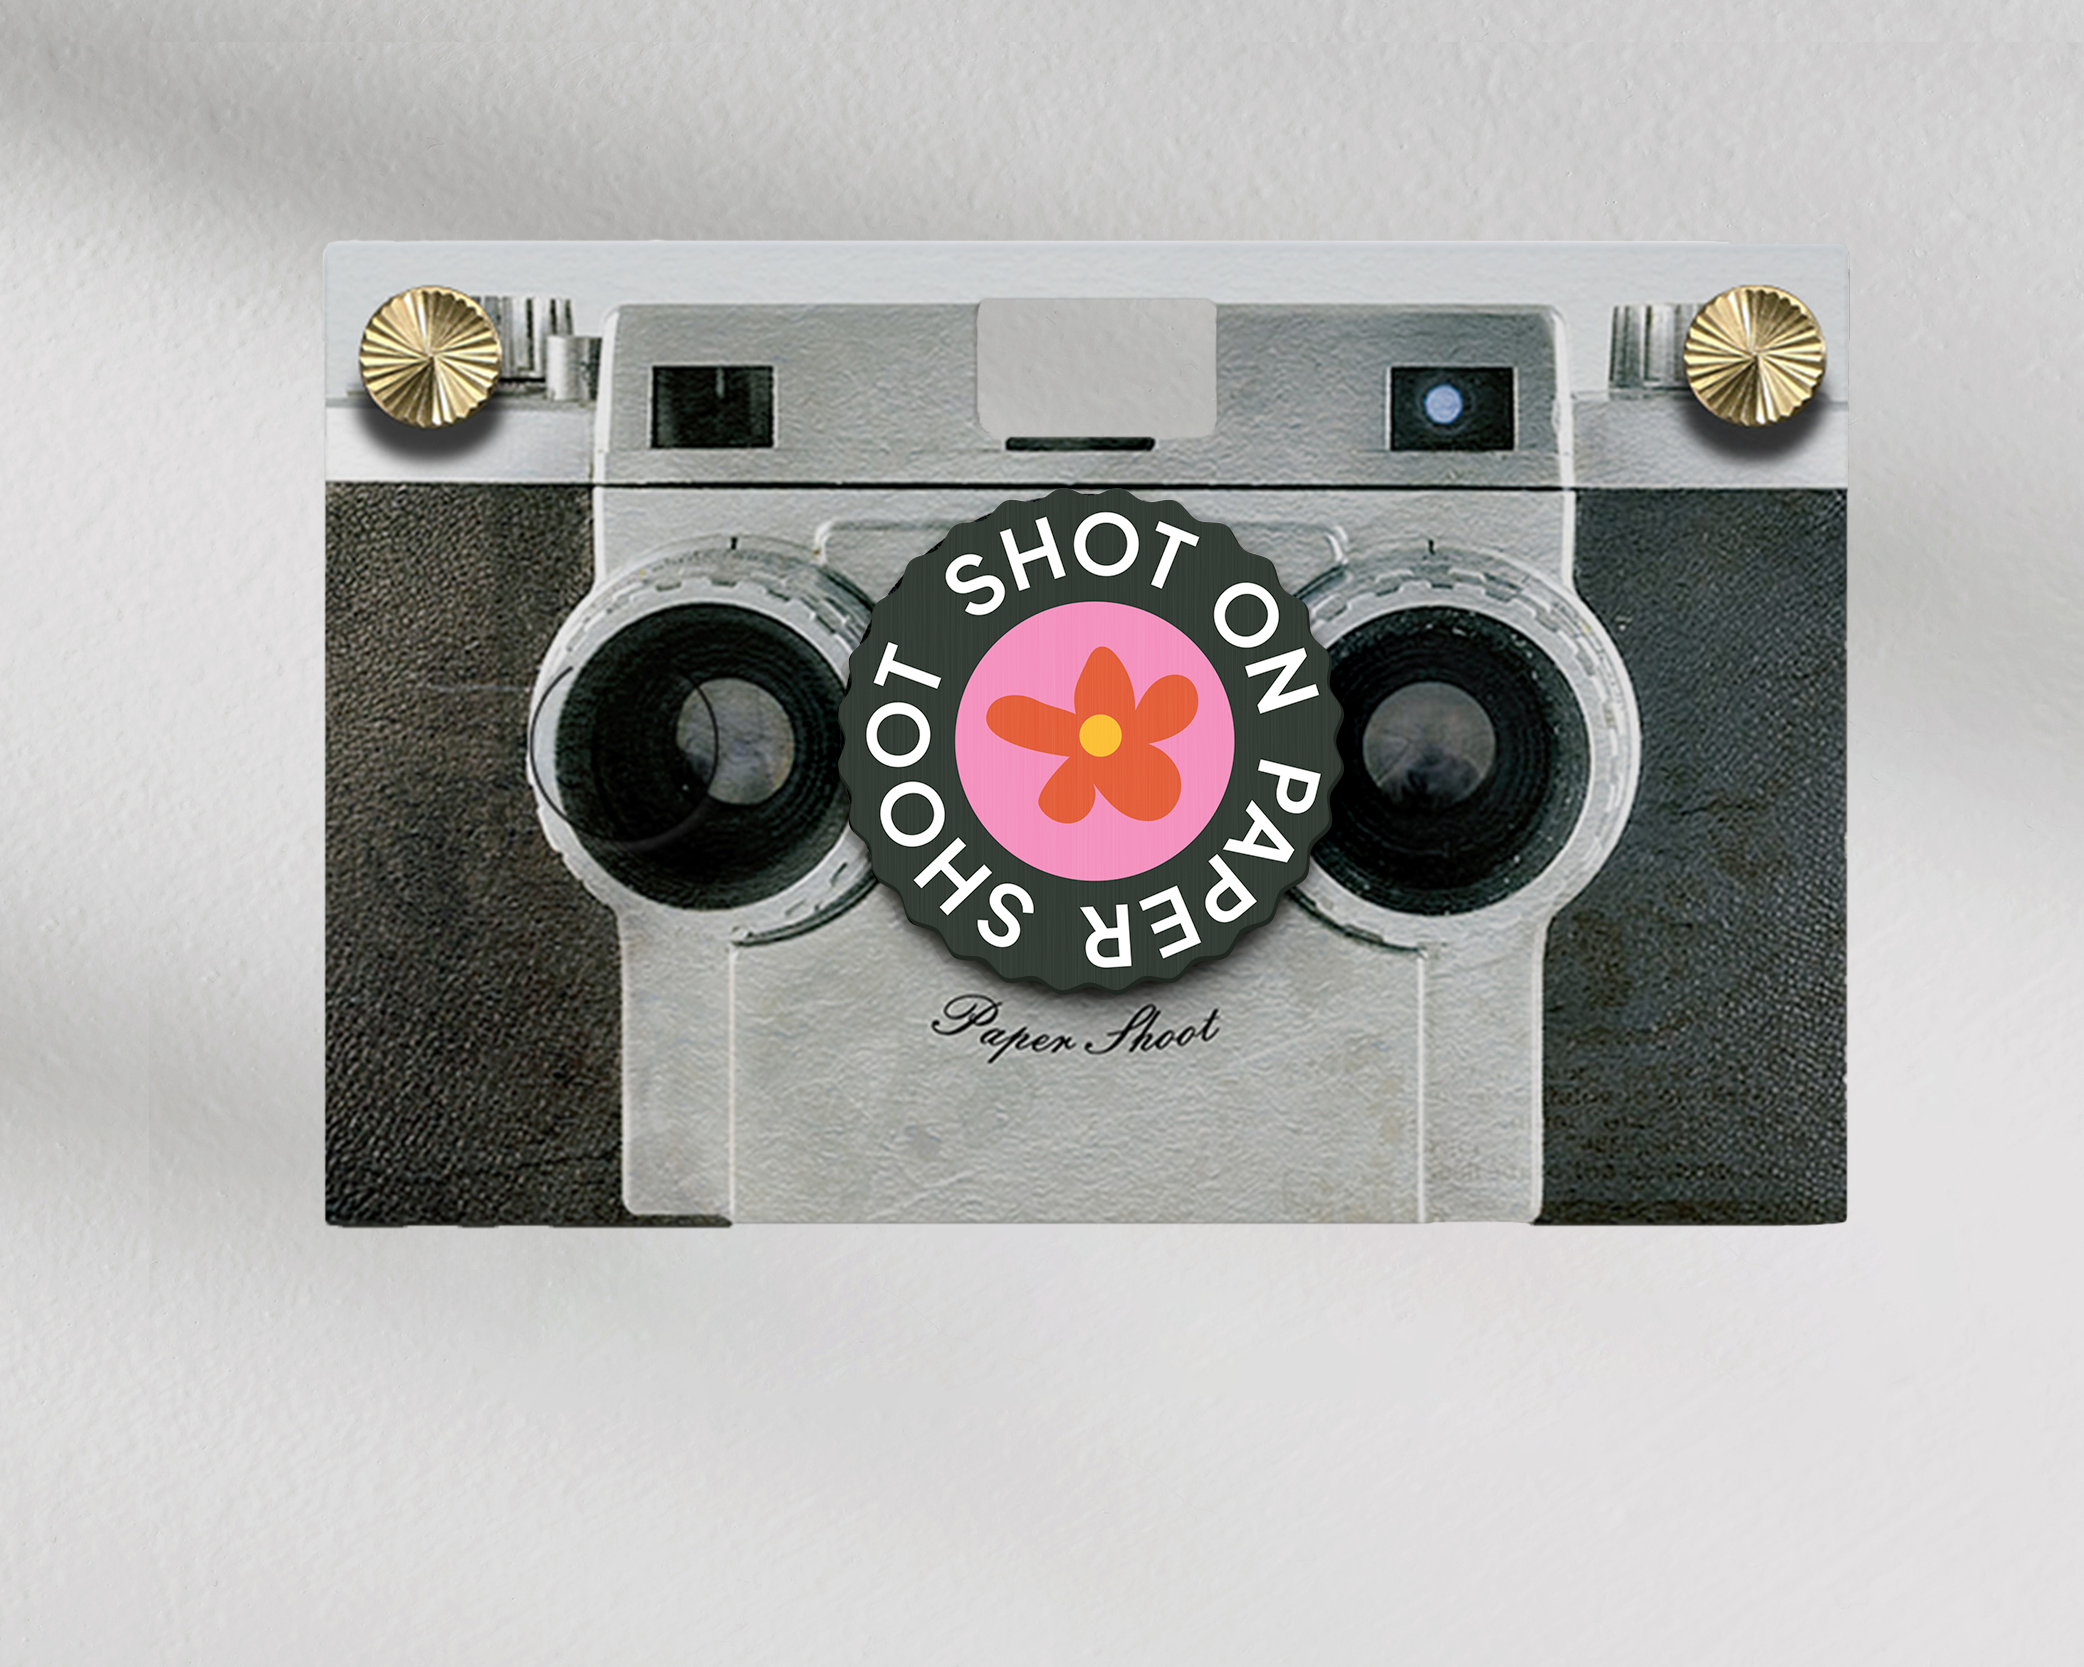 Shot on paper shoot text lens cover with red and yellow flower graphic with grip groves on a paper shoot camera 